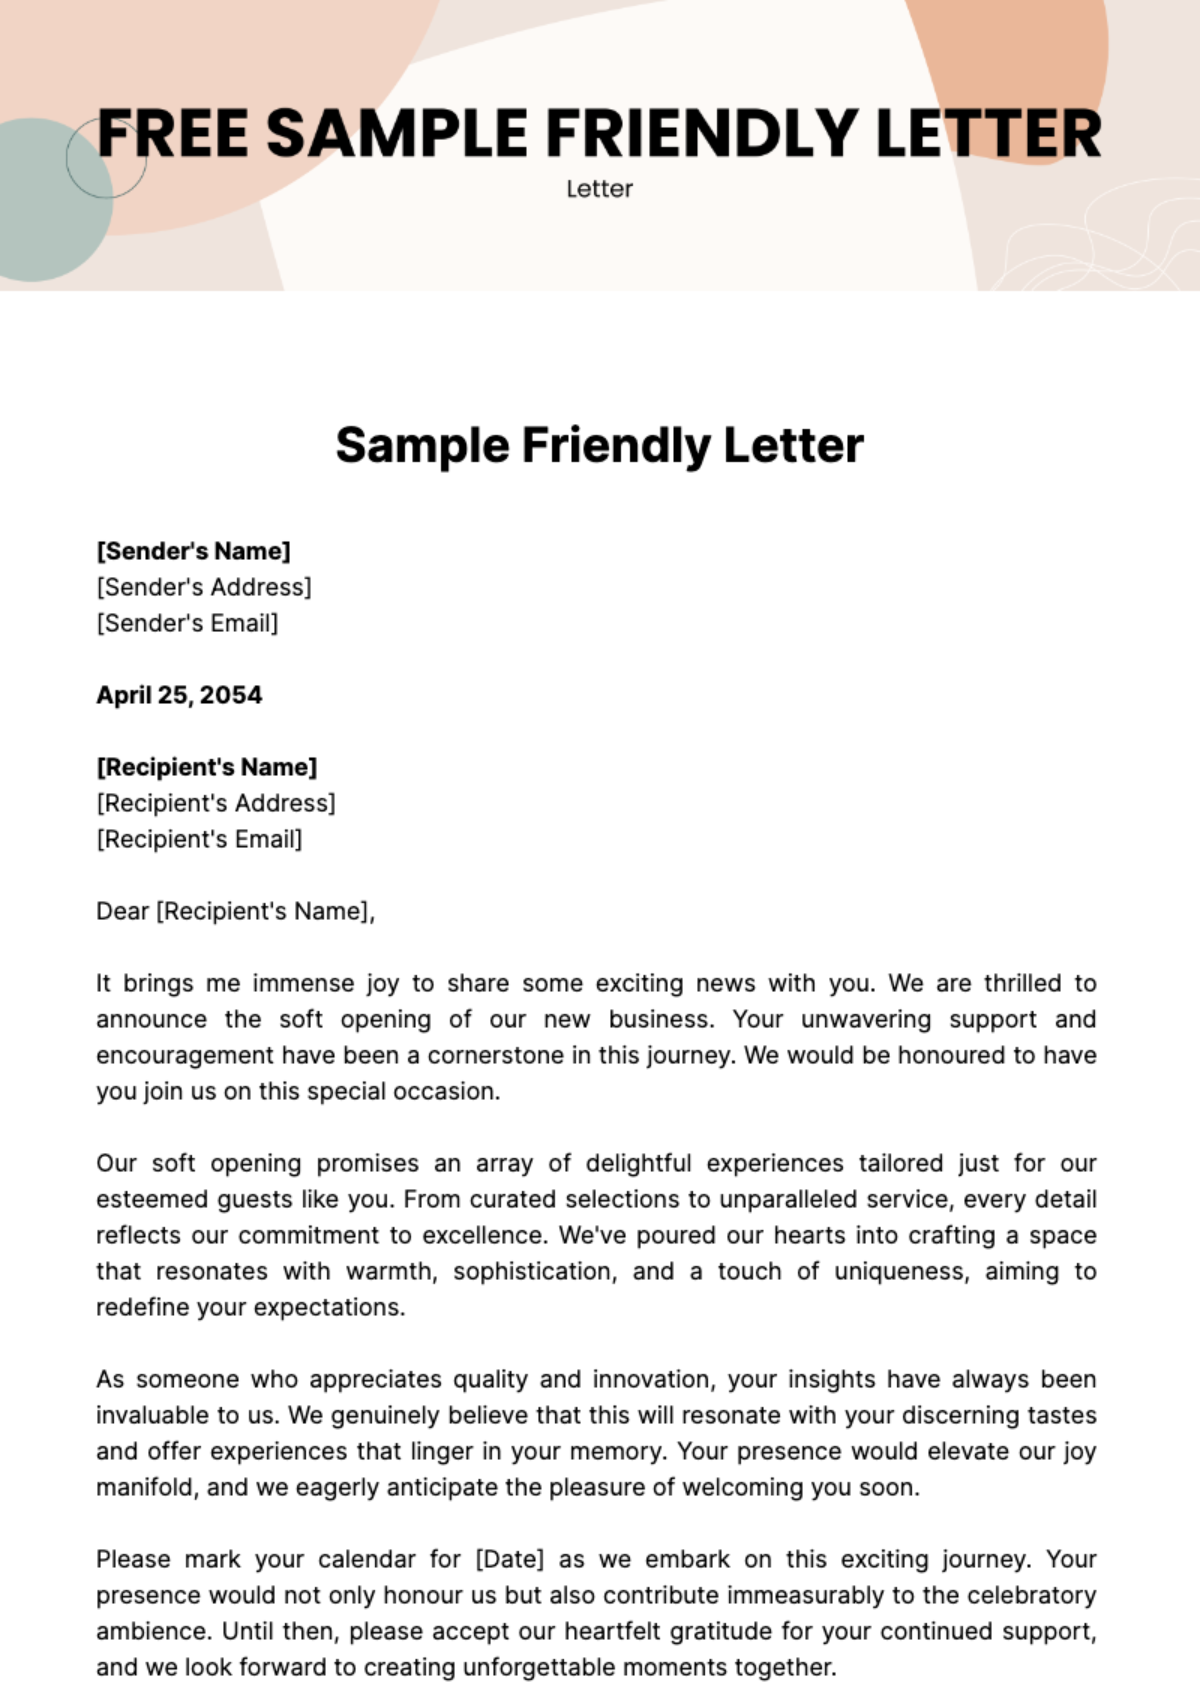 Free Sample Friendly Letter Template